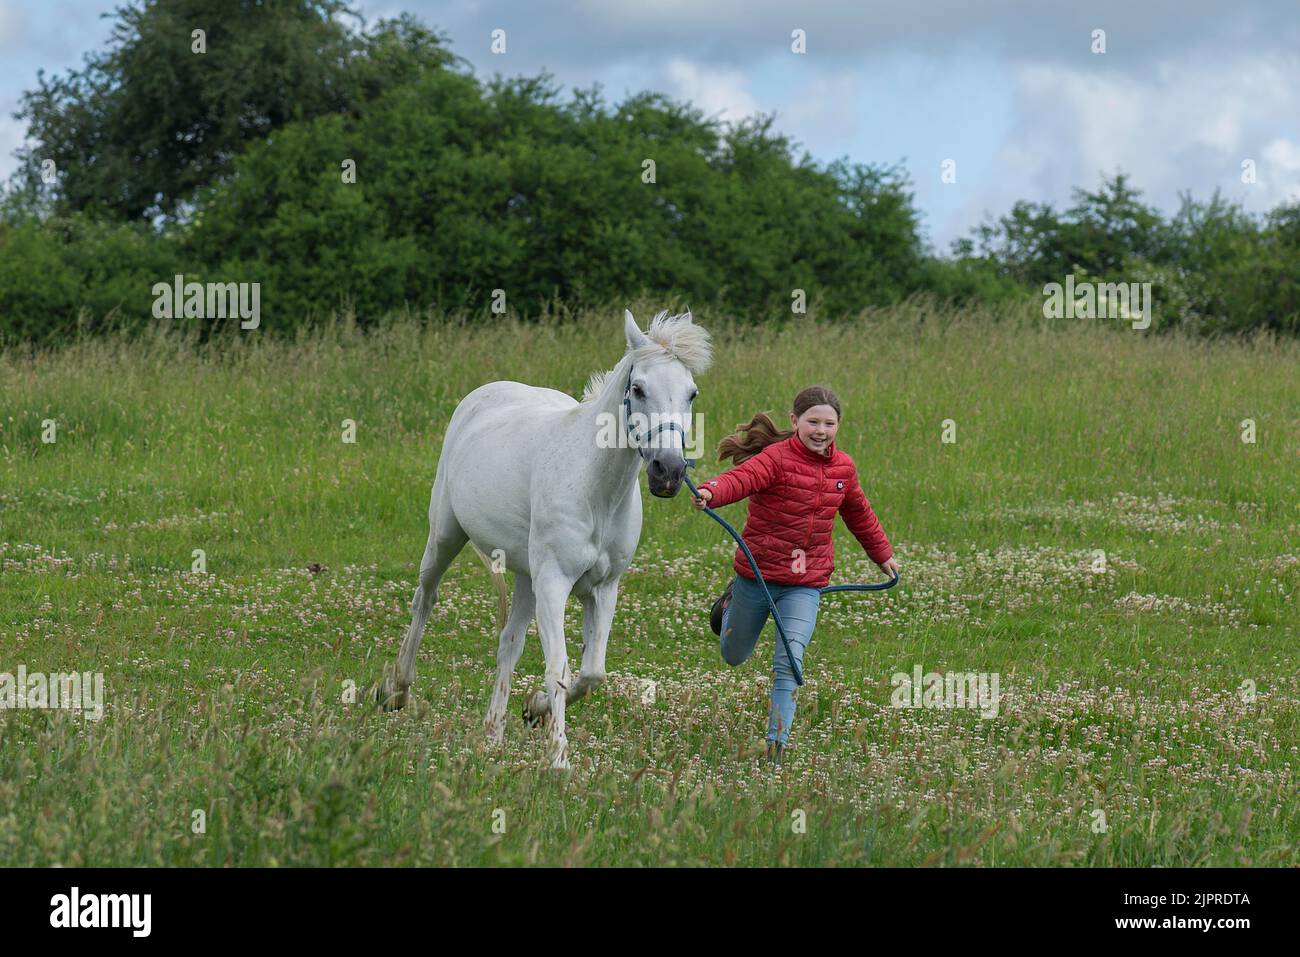 Girl, 10 years, running with her horse in the pasture, Mecklenburg-Western Pomerania, Germany Stock Photo